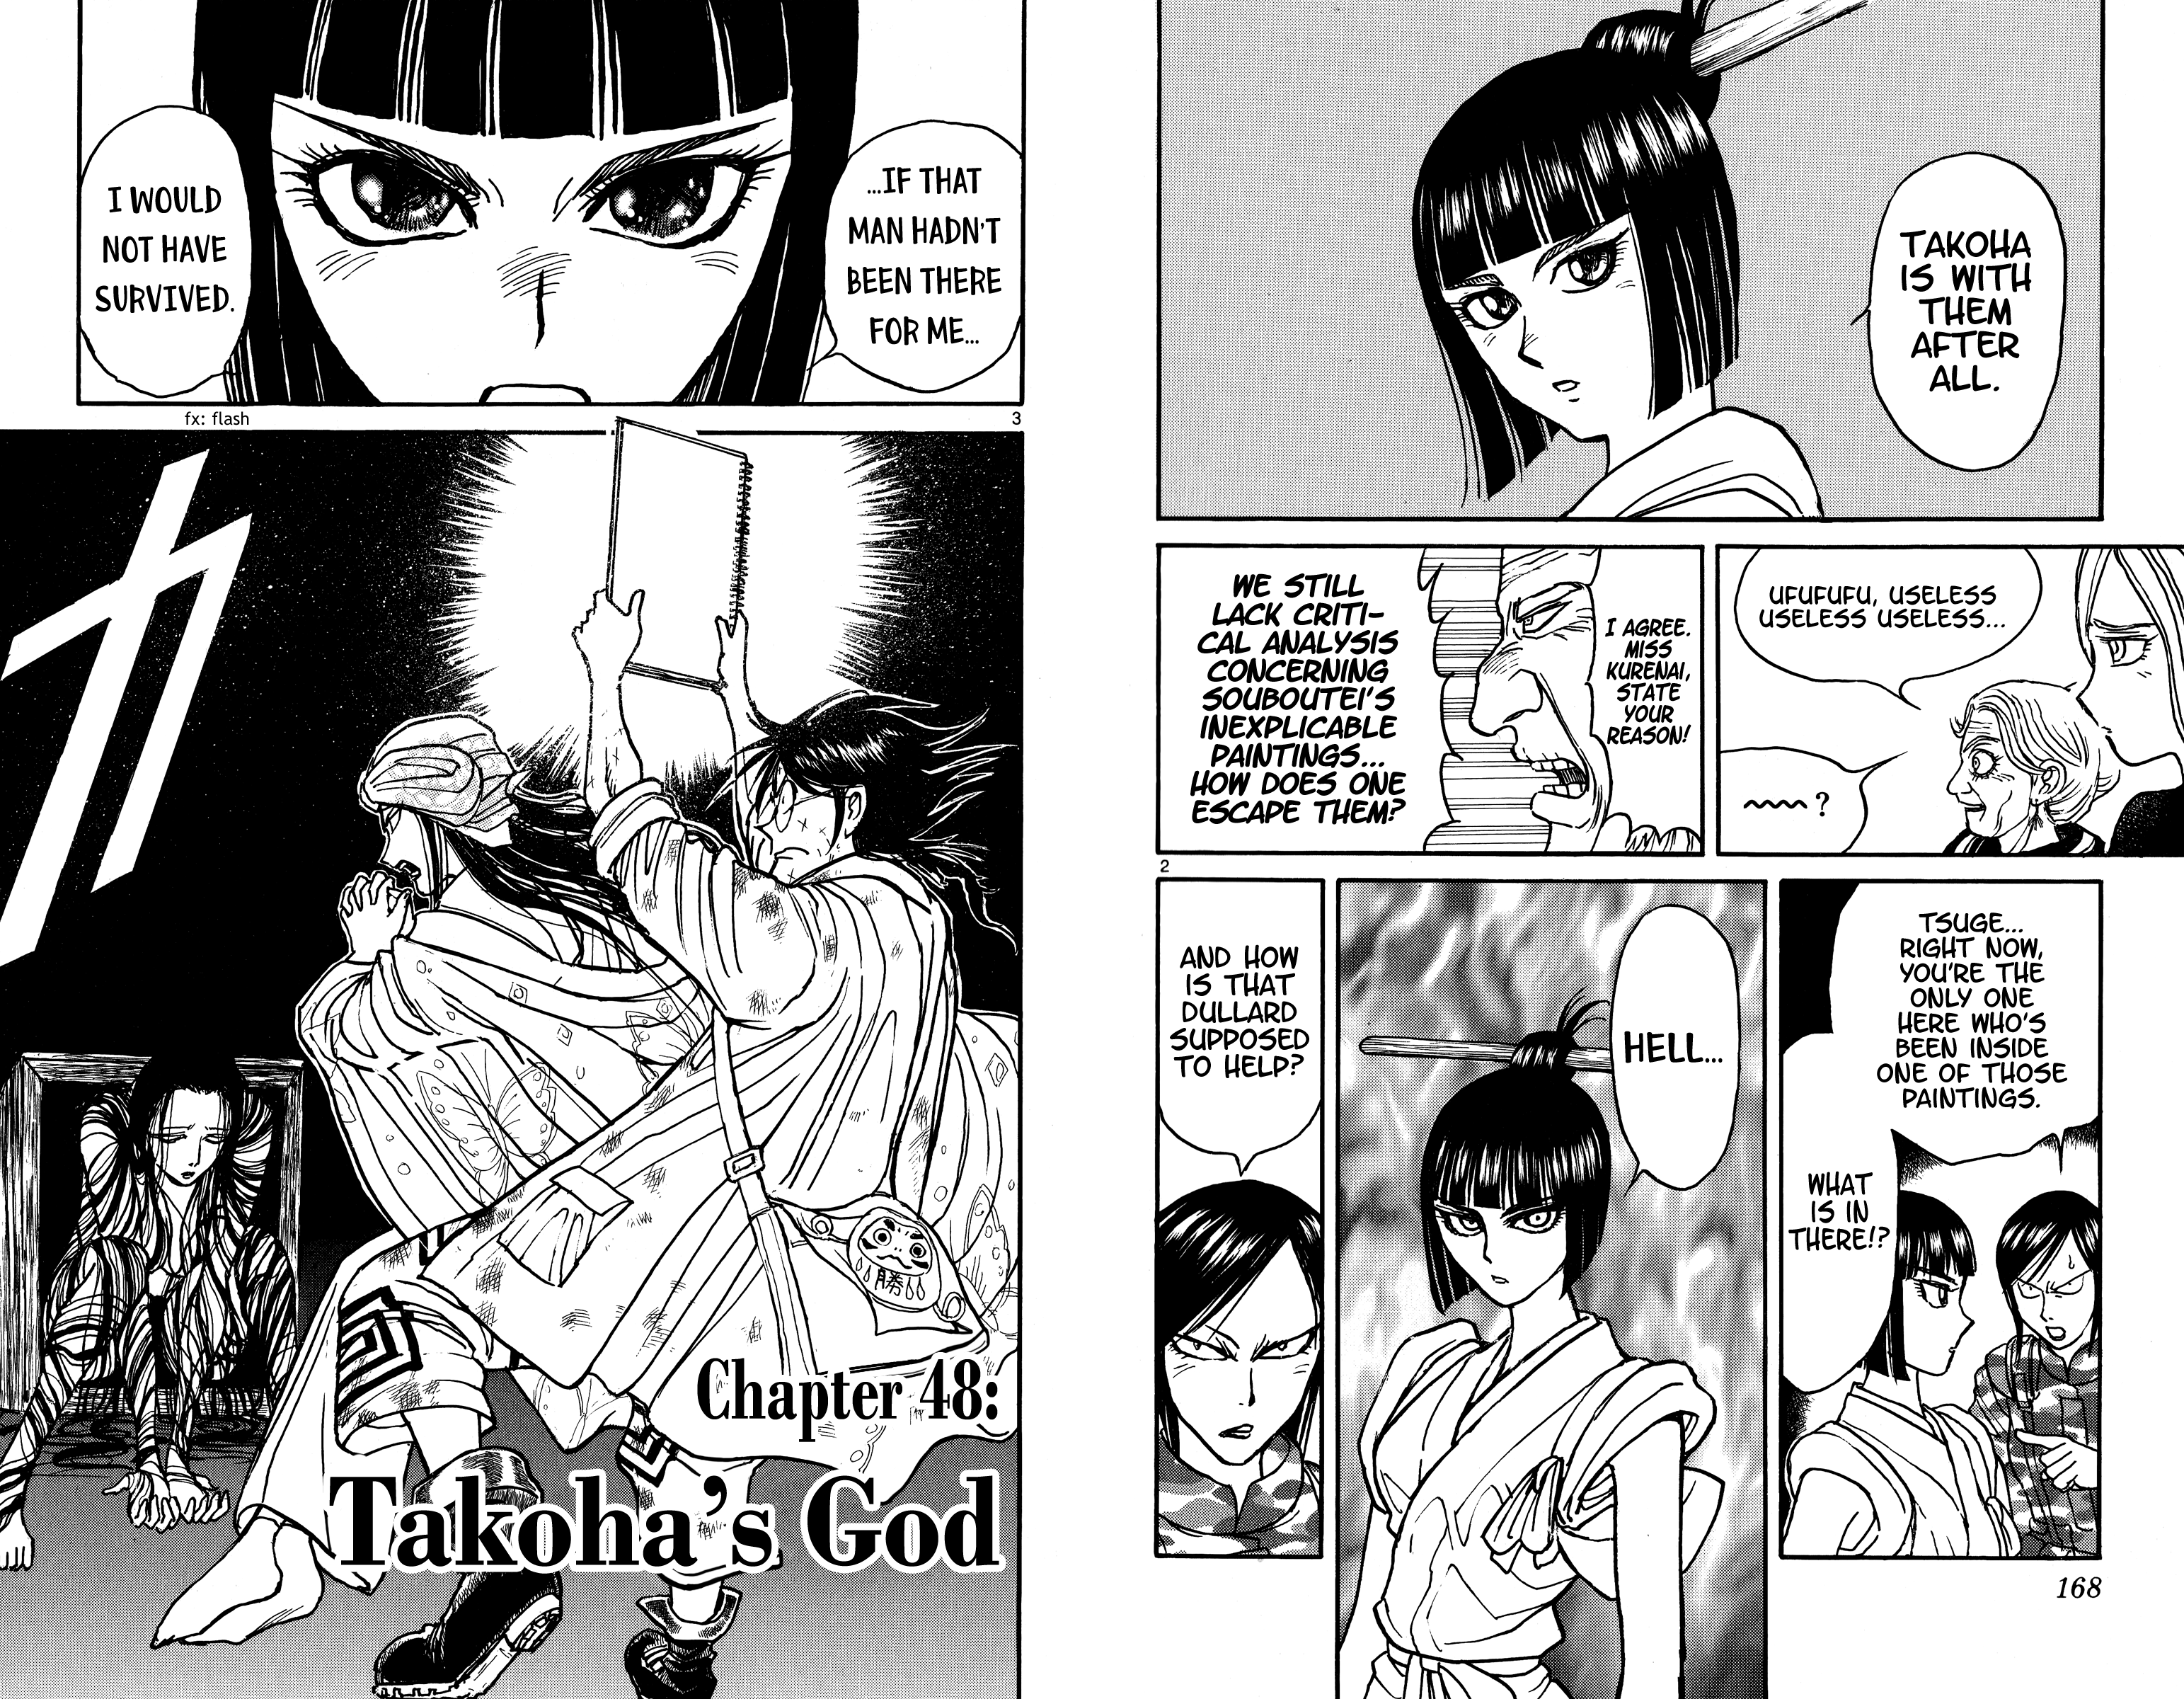 Souboutei Must Be Destroyed Vol.5 Chapter 48: Takoha's God - Picture 2